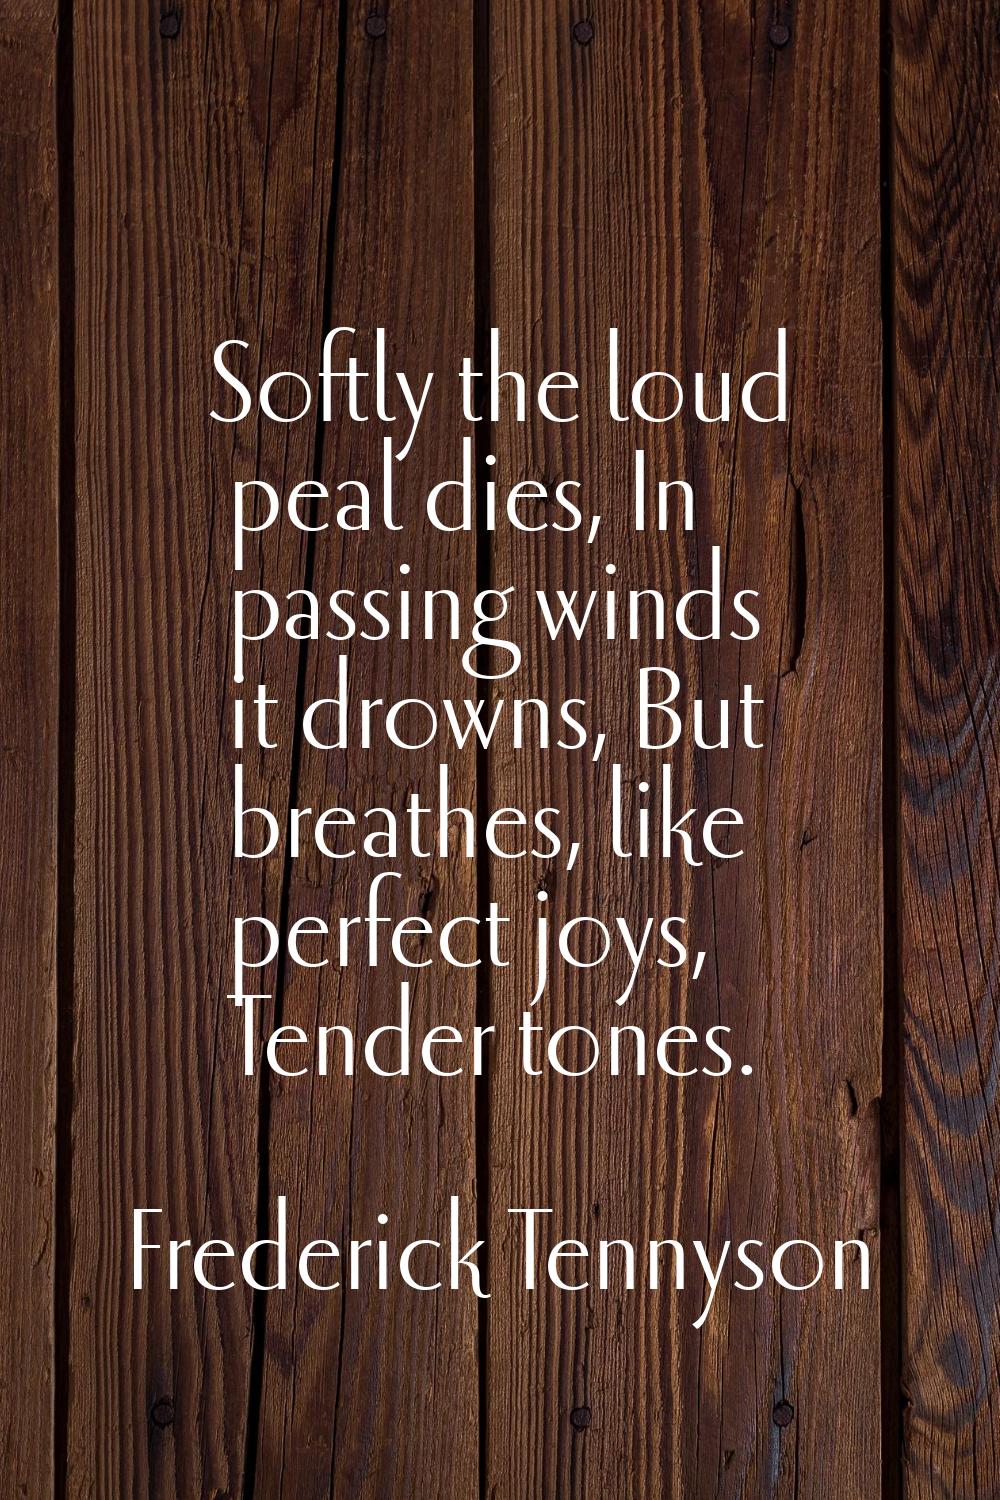 Softly the loud peal dies, In passing winds it drowns, But breathes, like perfect joys, Tender tone